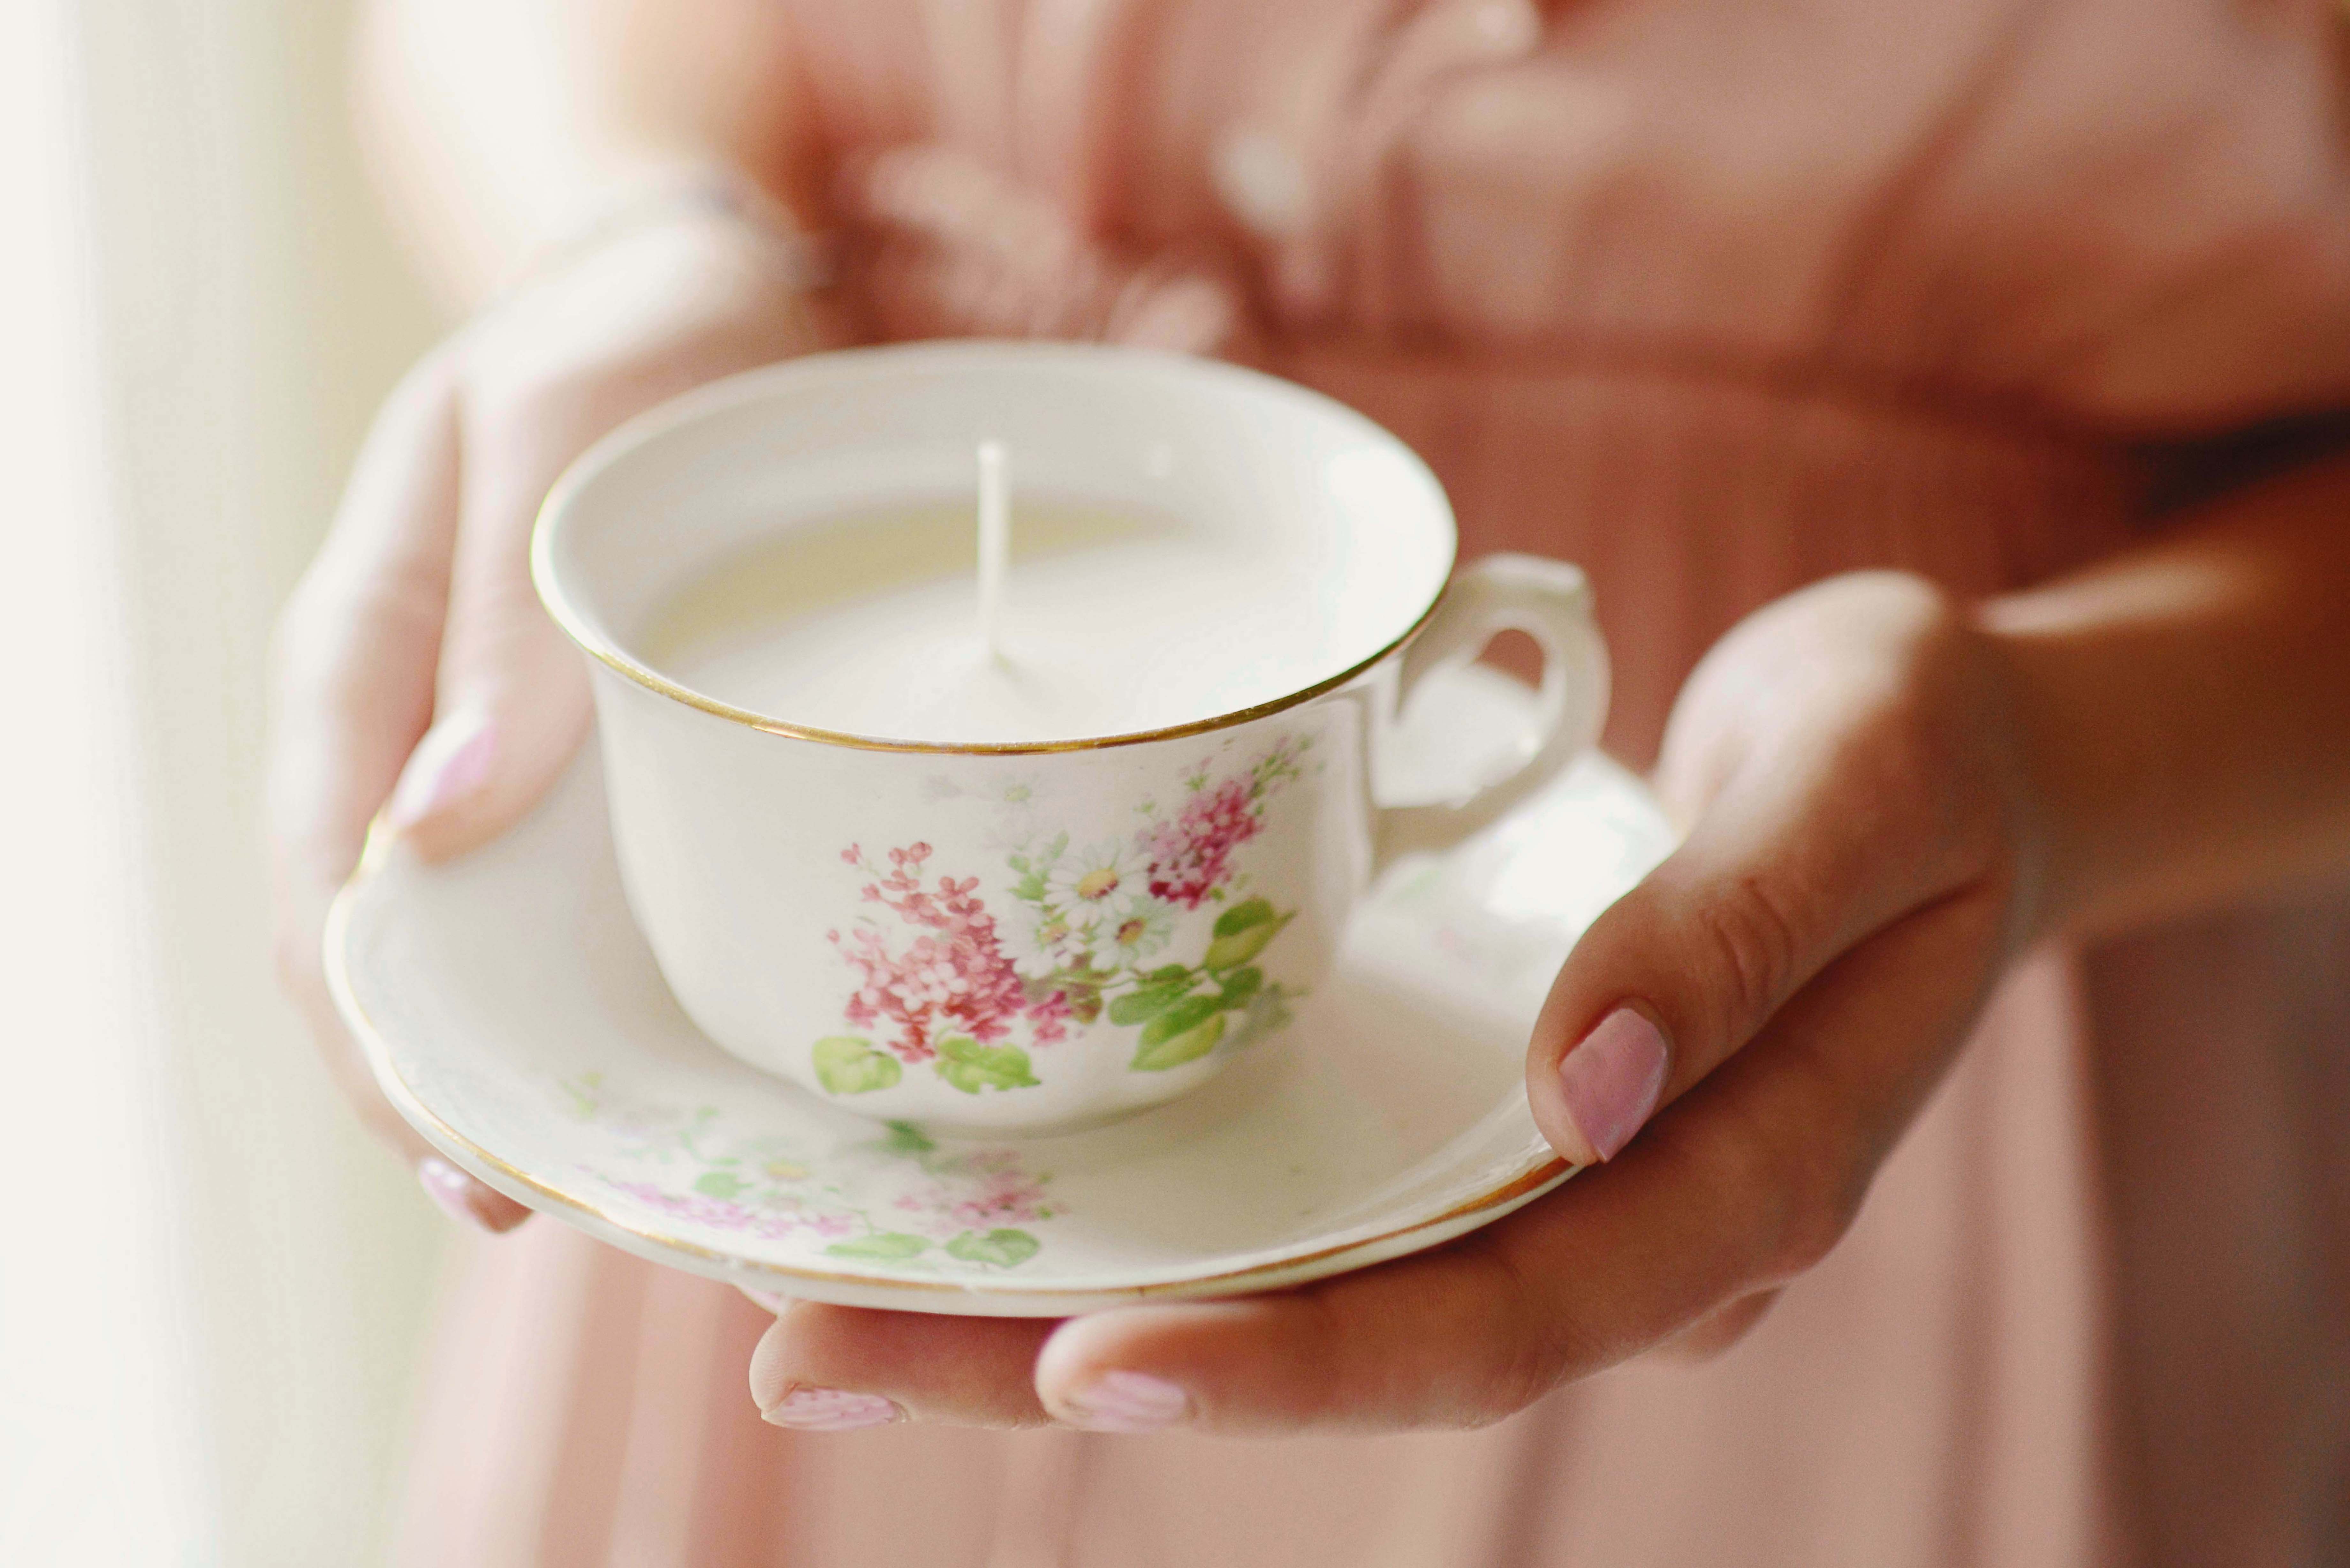 woman holding a teacup candle mothers day gift idea